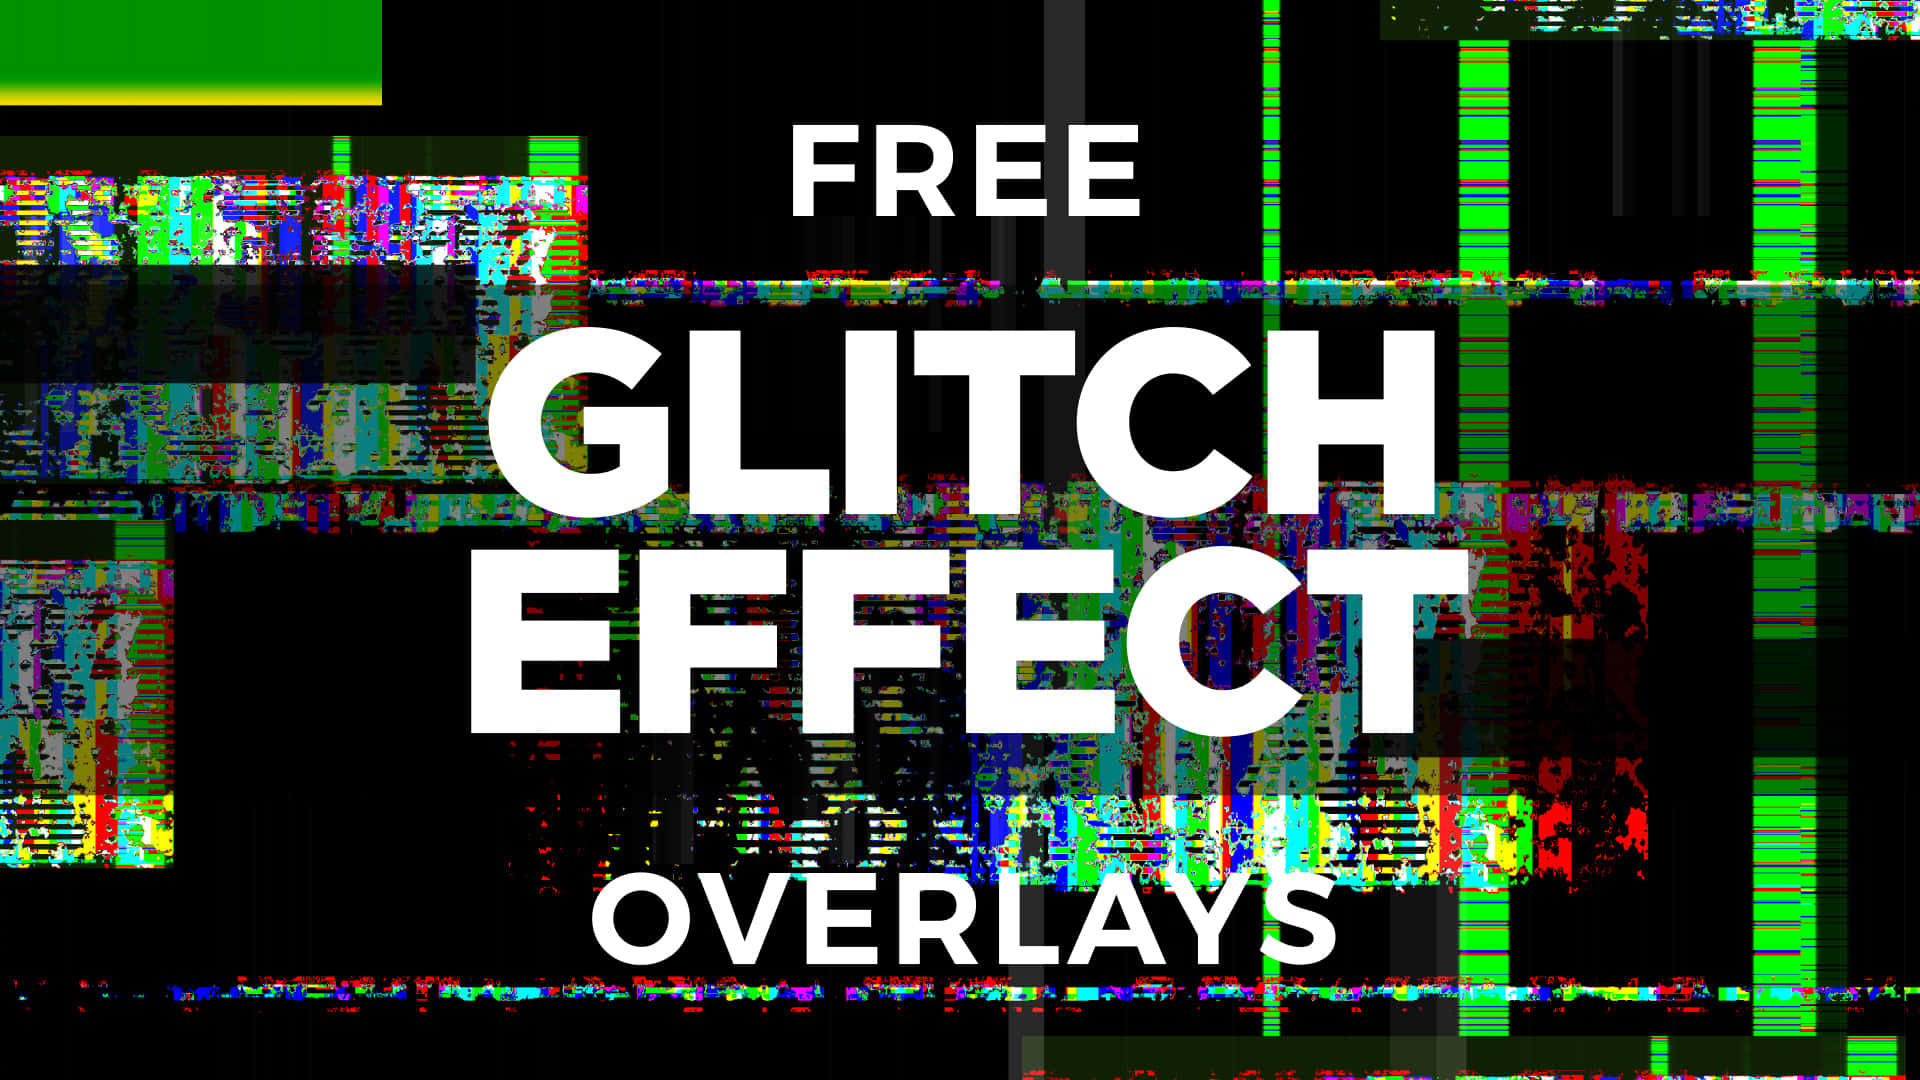 “Welcome to the world of Glitch”